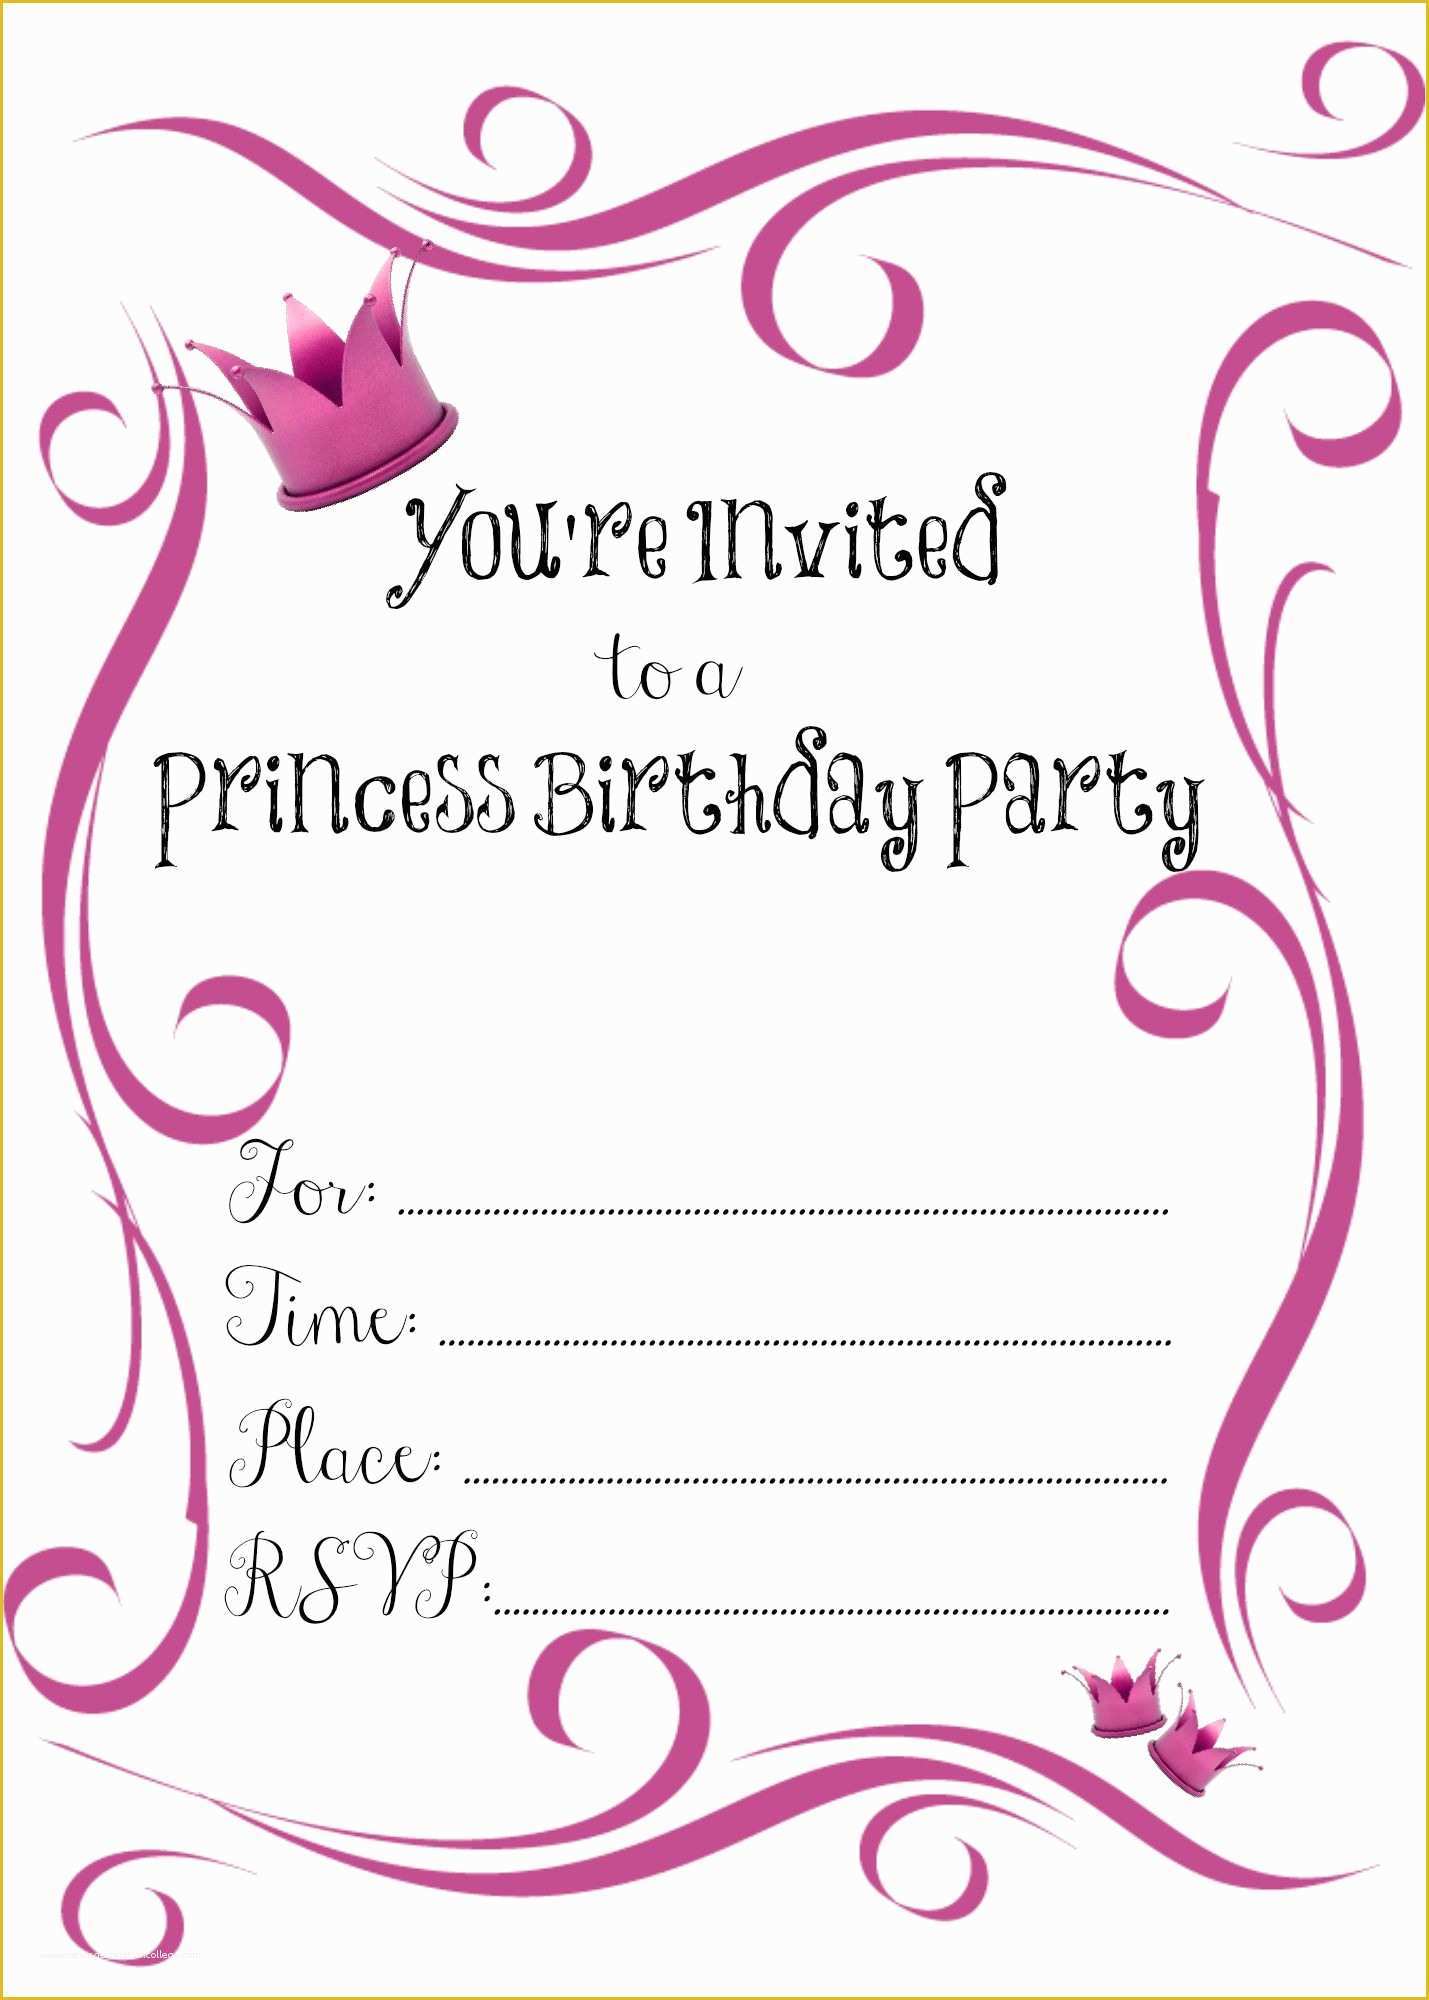 barbie-birthday-invitations-templates-free-invitations-resume-template-collections-m3bvaweznl